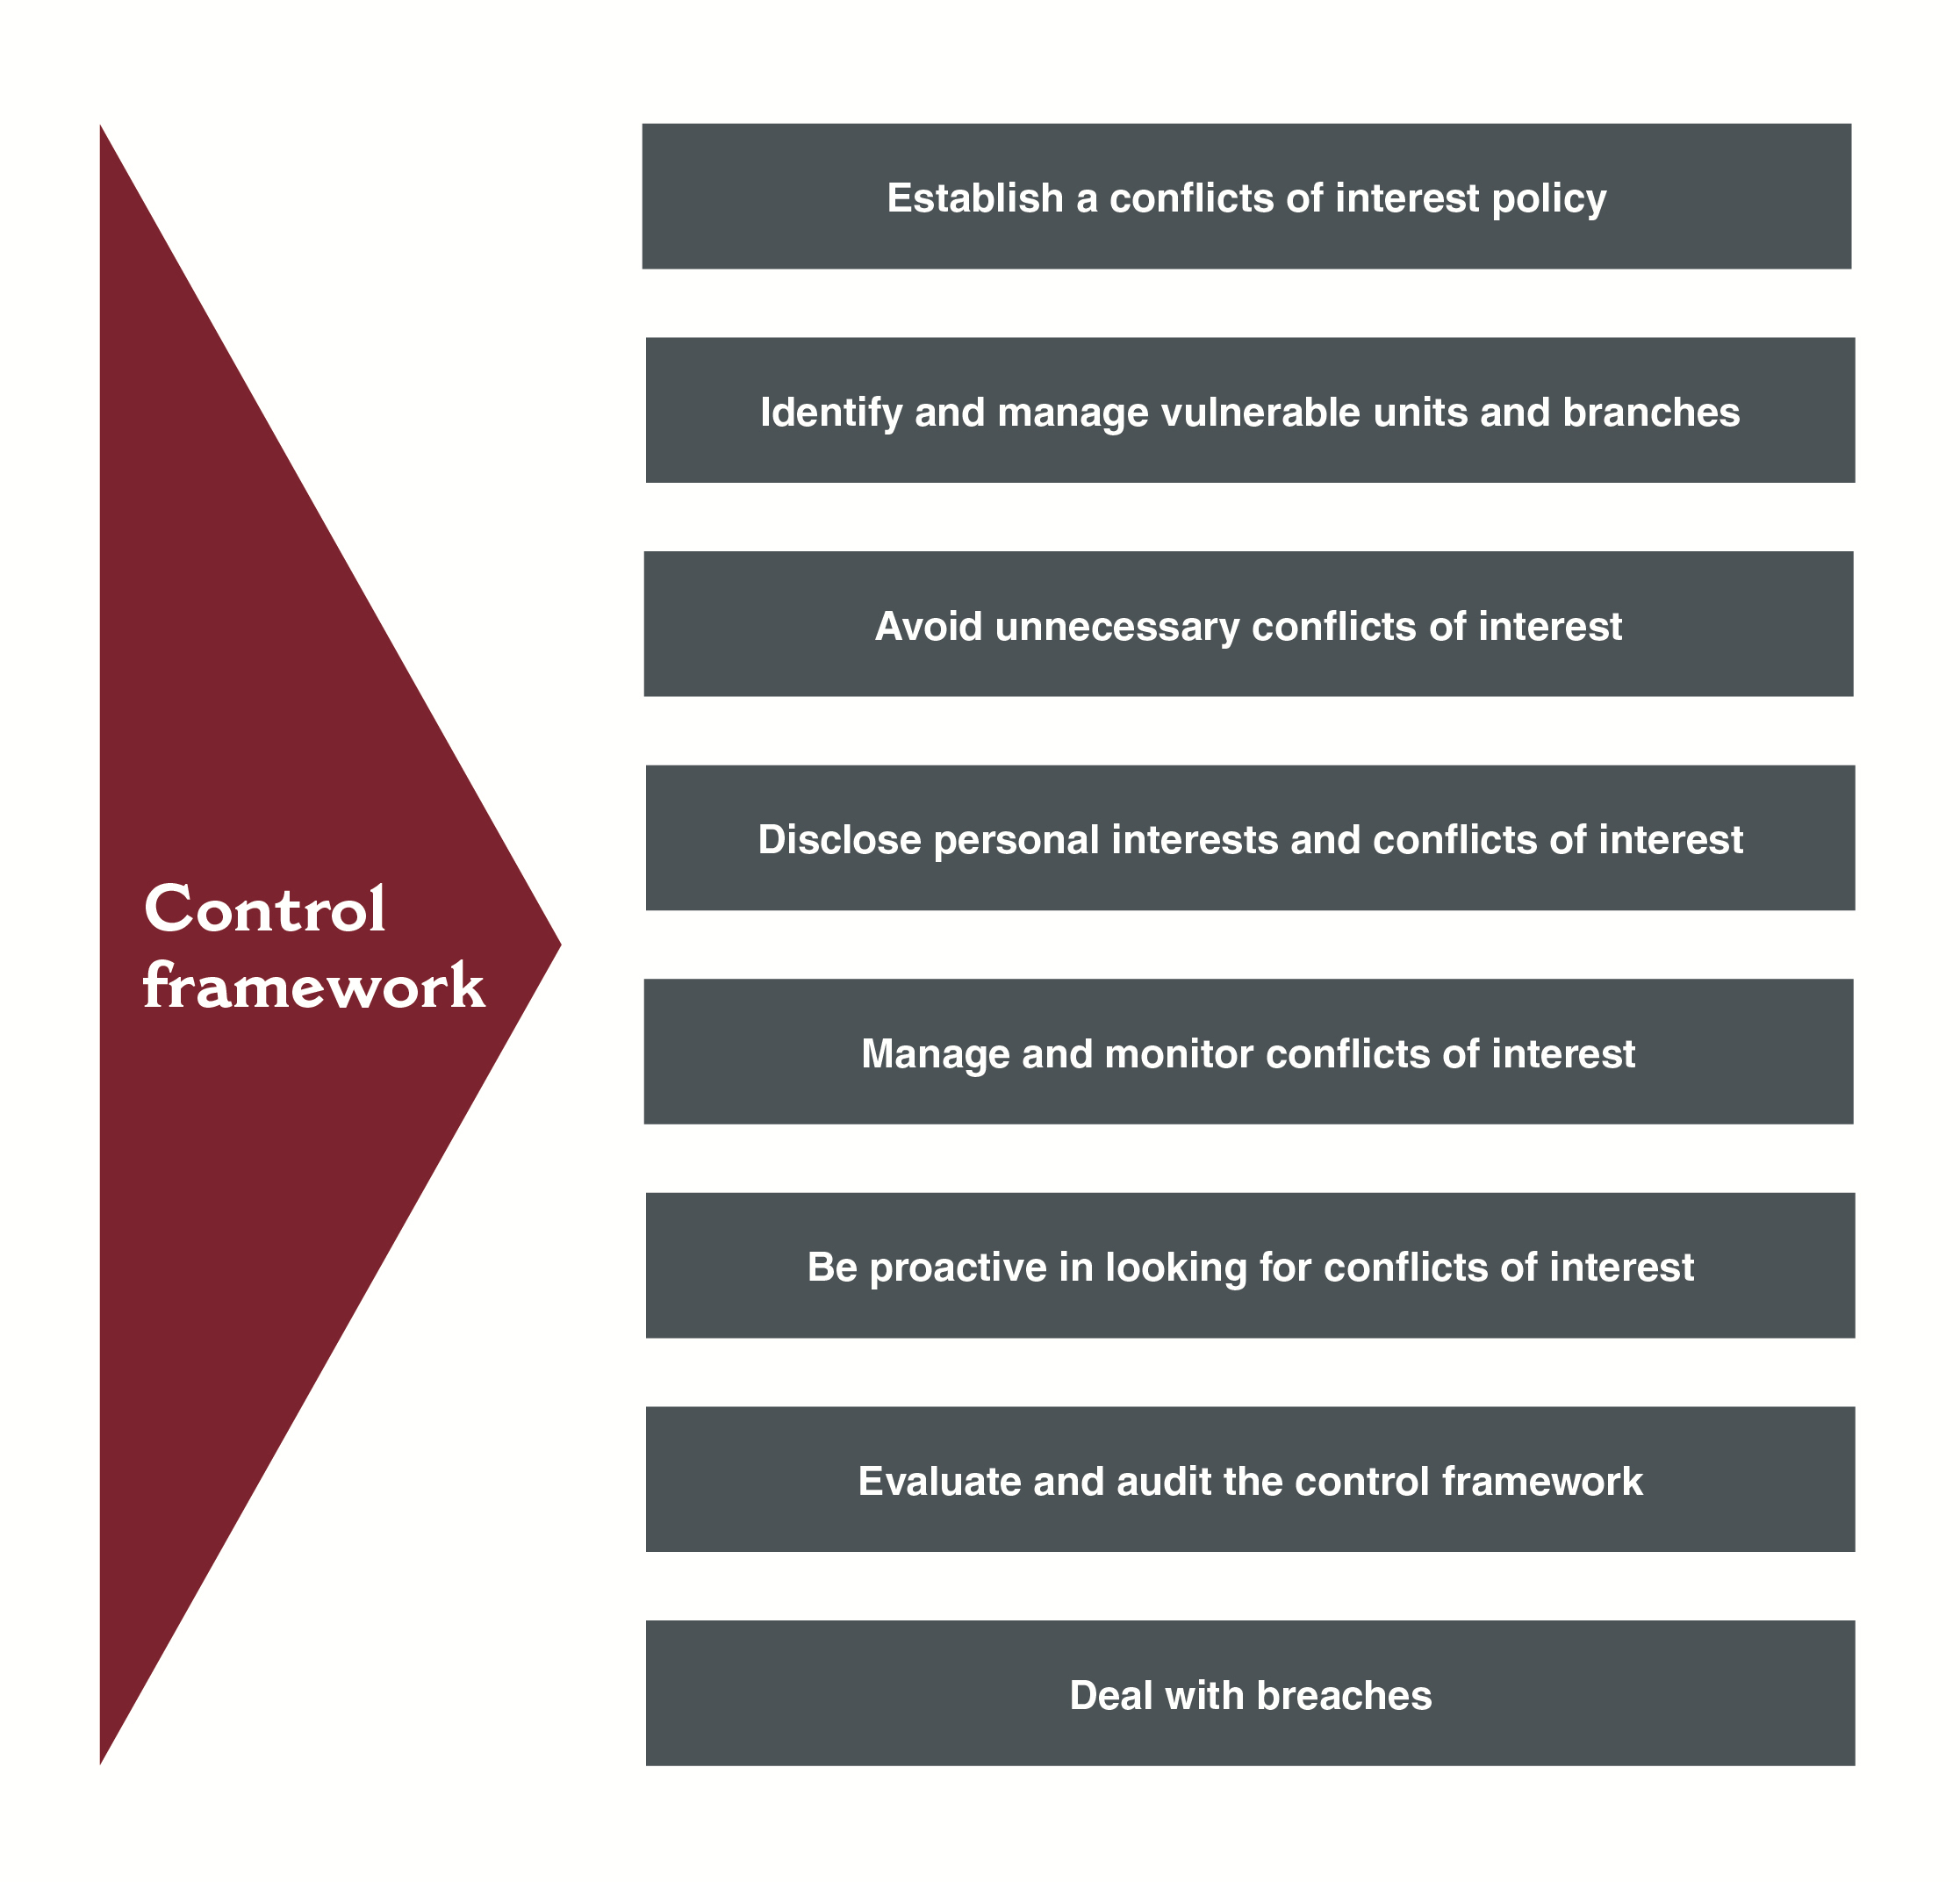 Control framework: Establish a conflicts of interest policy, Identify and manage vulnerable units and branches, Avoid unnecessary conflicts of interest, Disclose personal interests and conflicts of interest, Manage and monitor conflicts of interest, Be proactive in looking for conflicts of interst, Evaluate adn audit the control framework, Deal with breaches